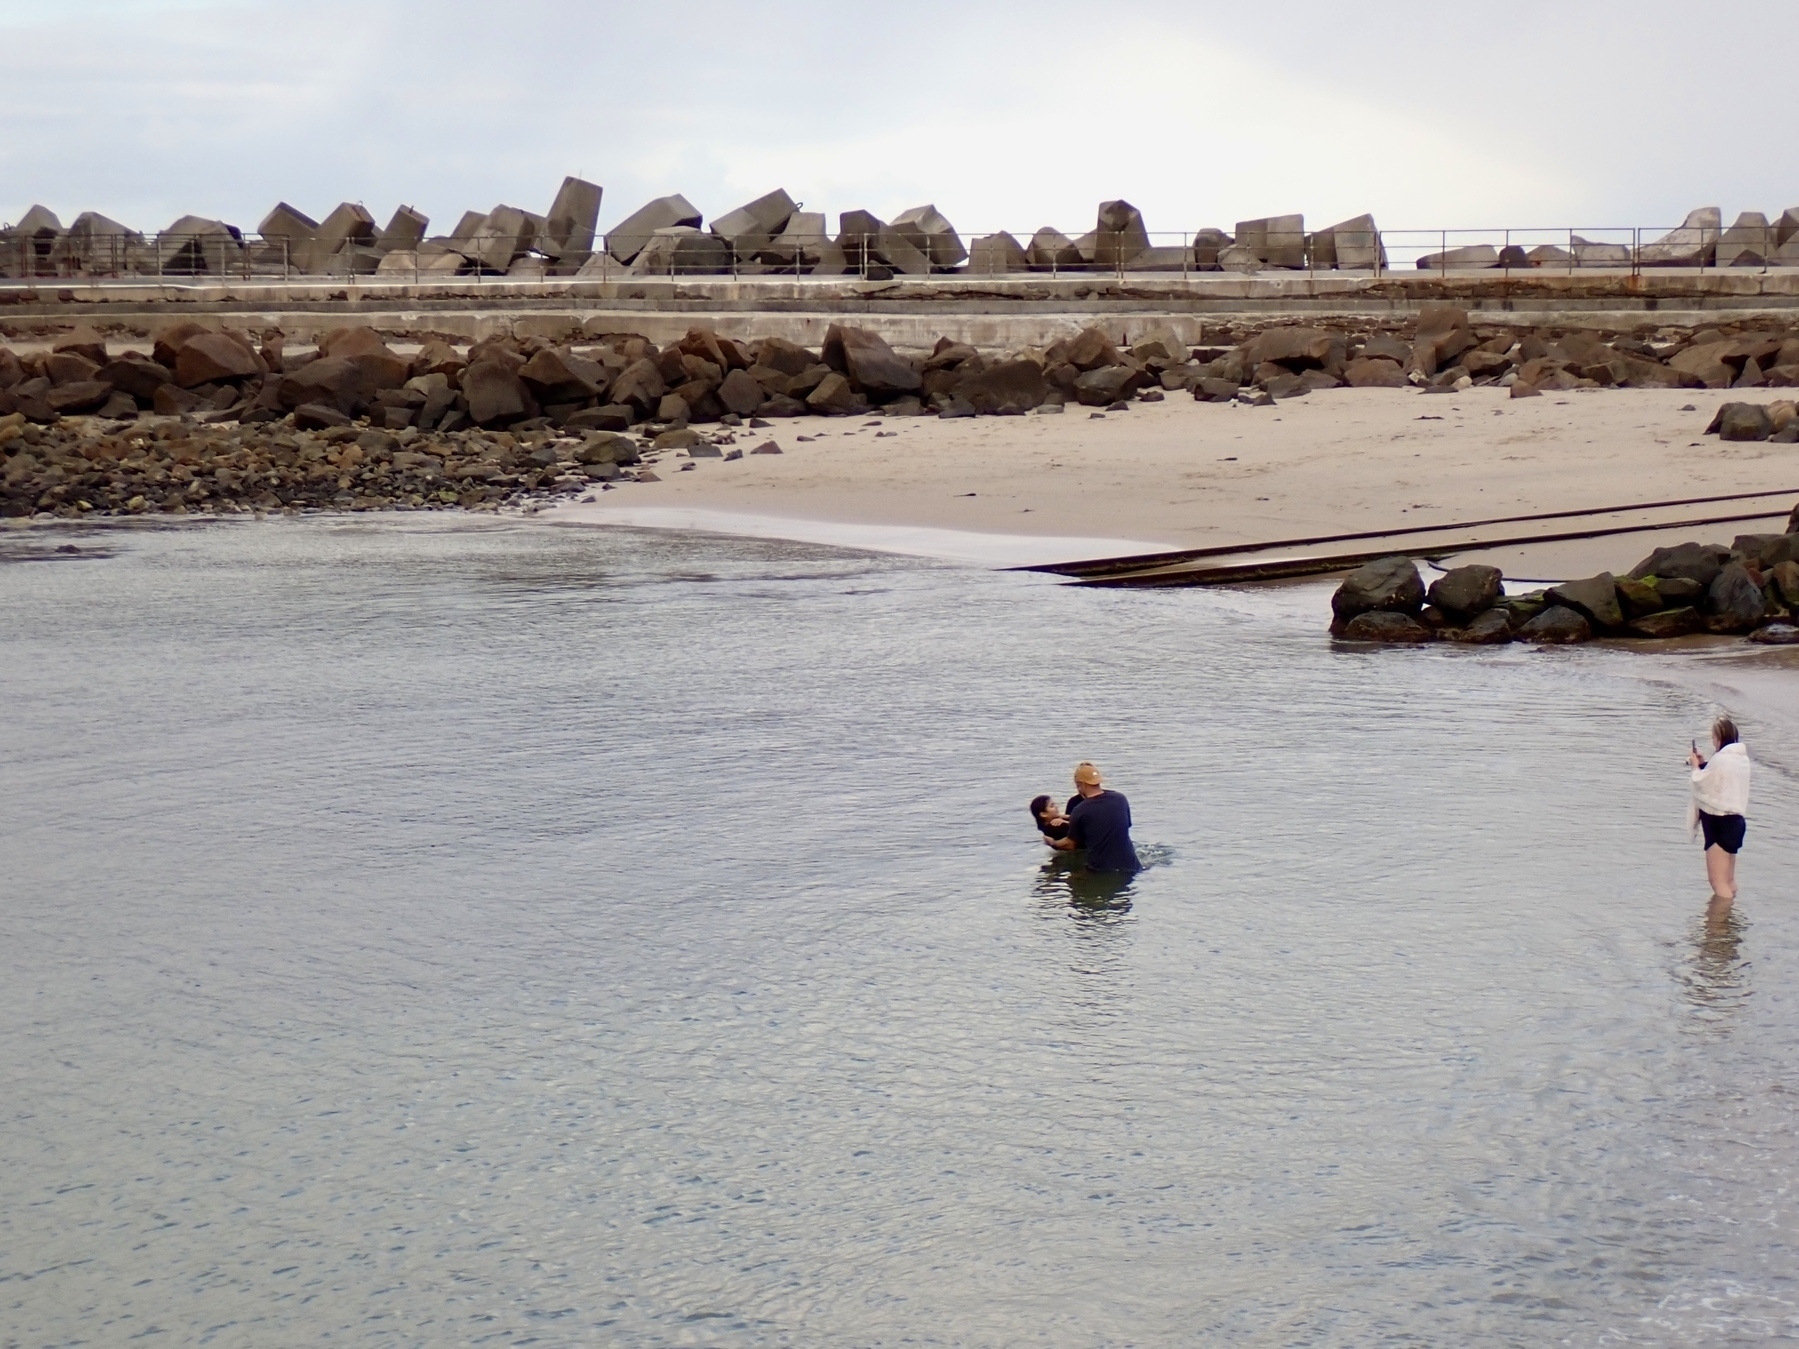 A person is dunked in water at a sheltered beach, with a rock wall in the background.